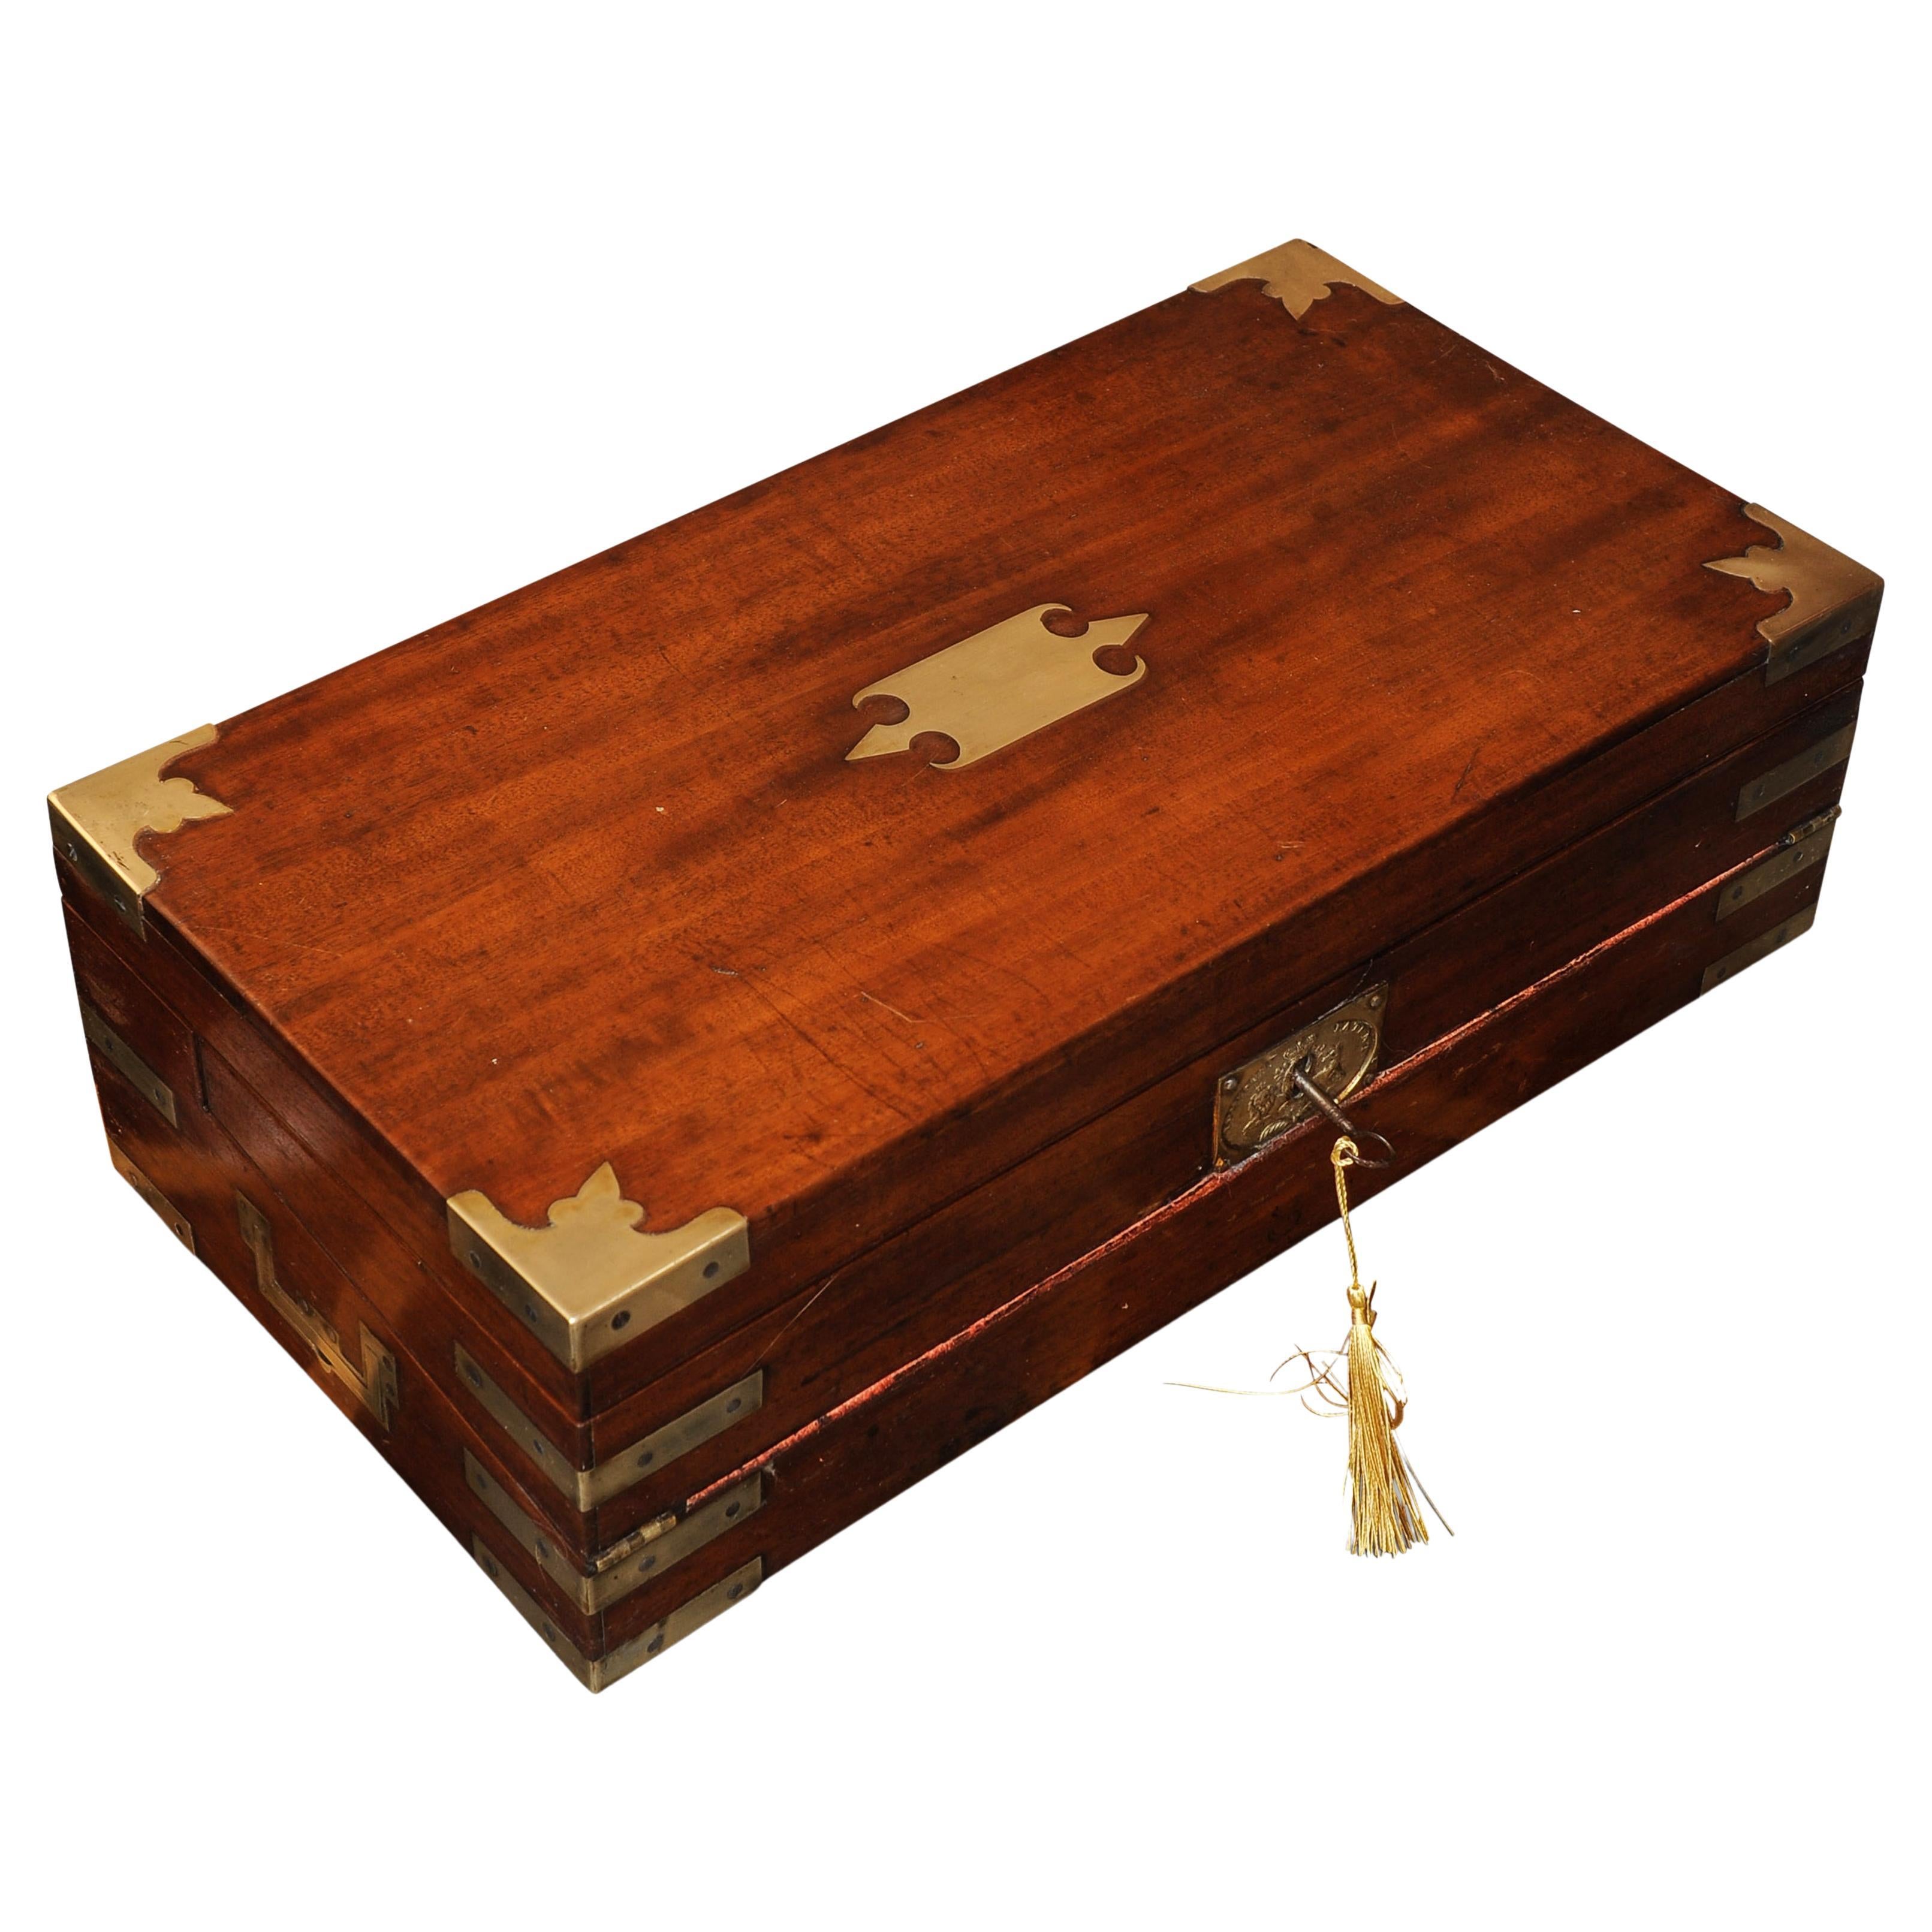 A stunning georgian military campaign rosewood & brass bound hand crafted writing slope.
With Red Tooled Leather Interior, Befit with the original glass inkwells.
Made by Esteemed Maker with Royal Warrant 